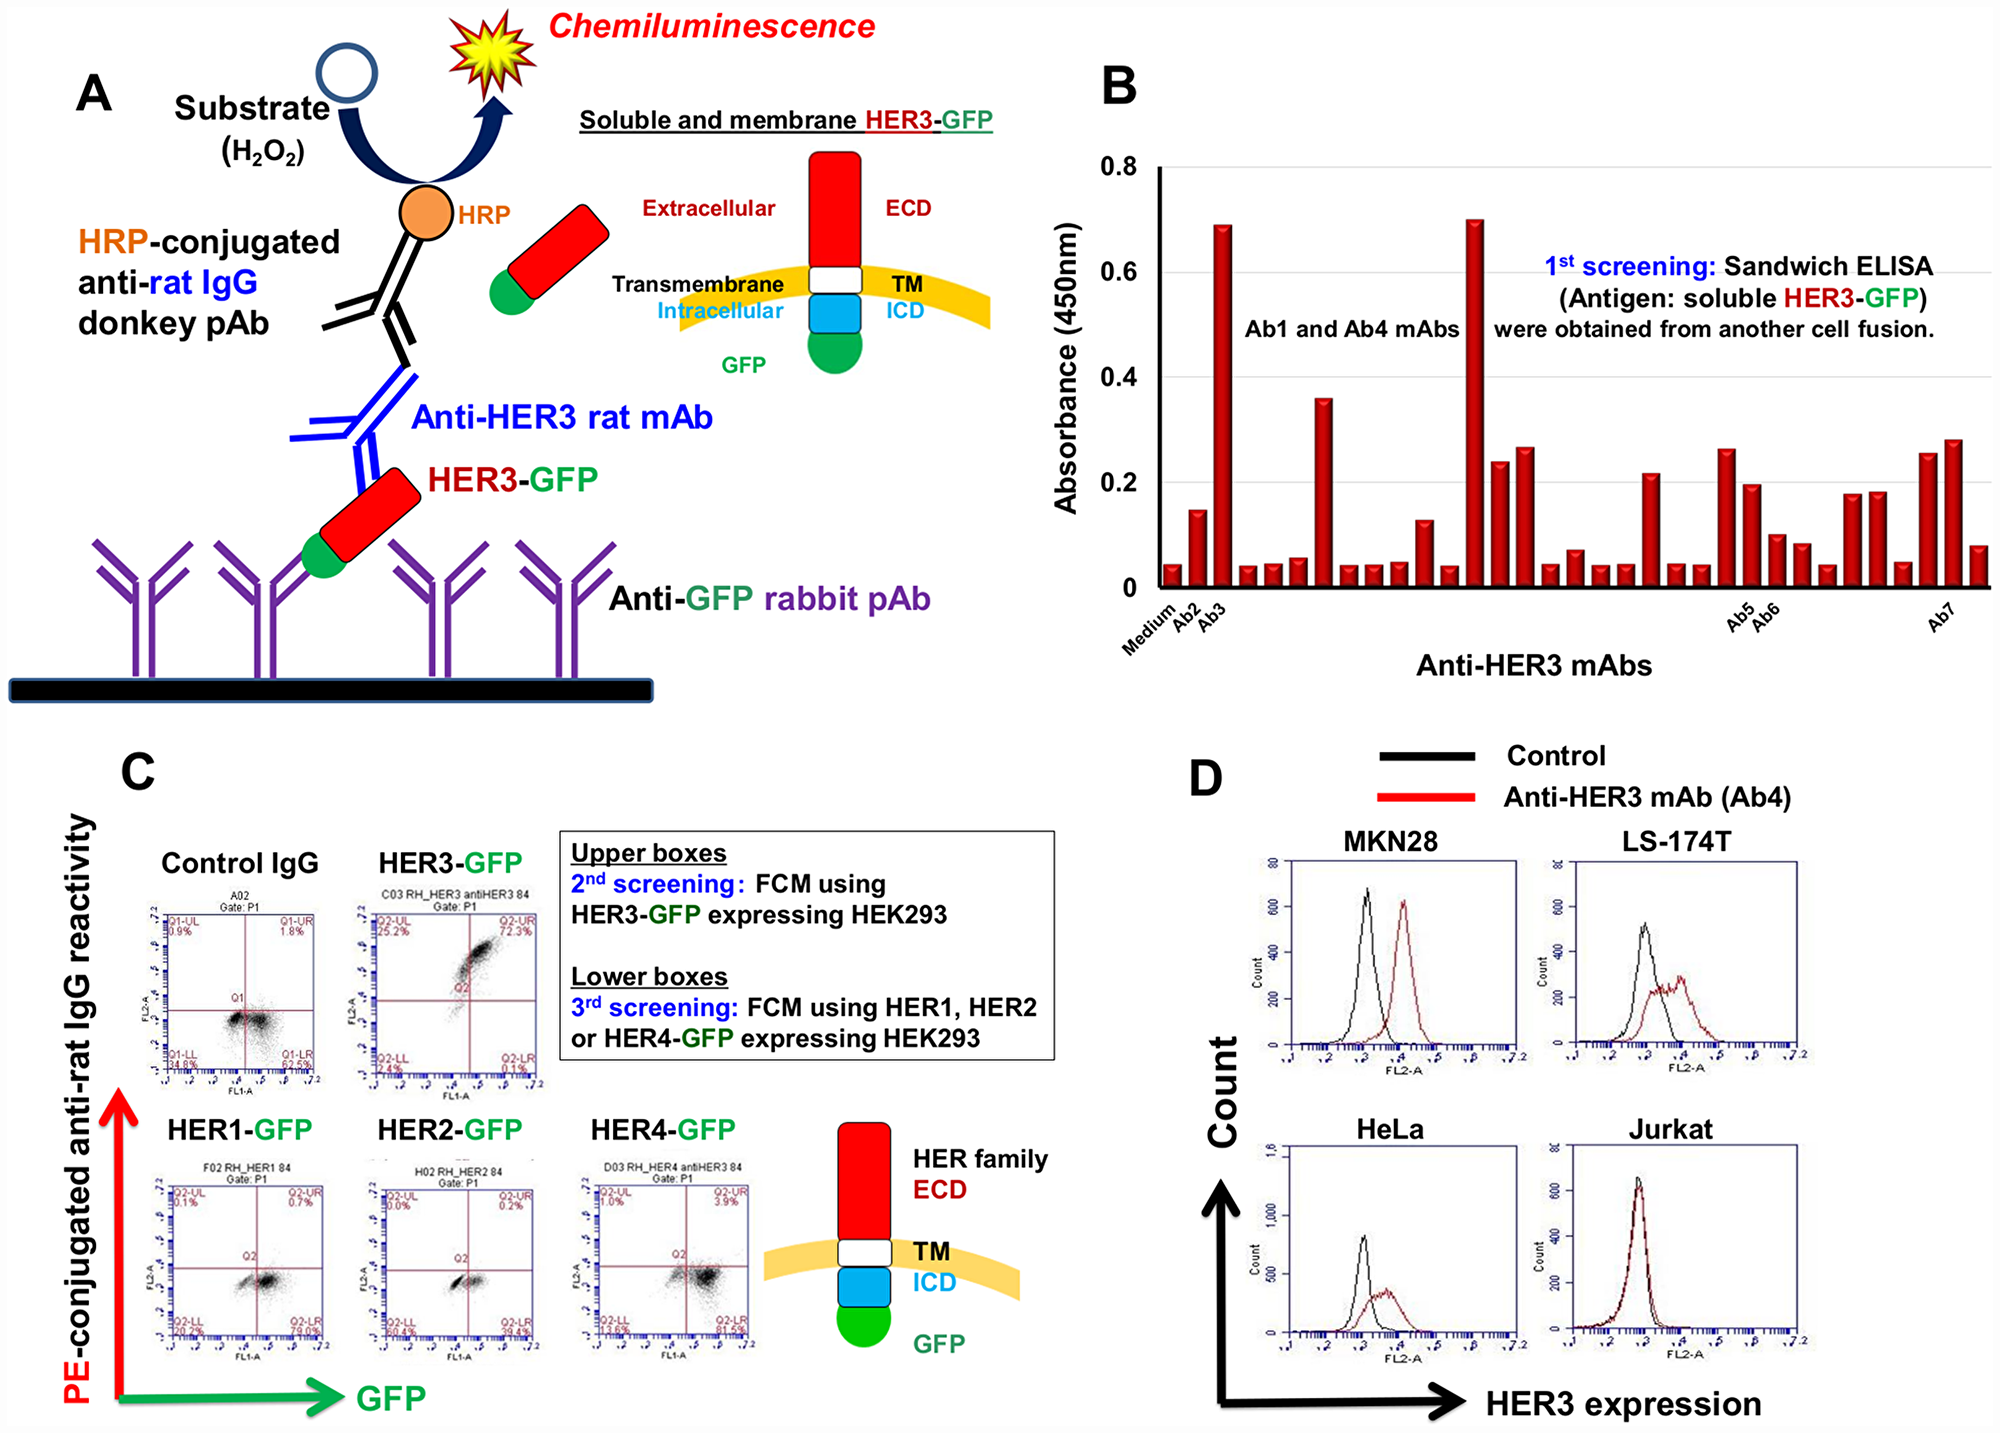 Production of specific anti-HER3 rat mAb.